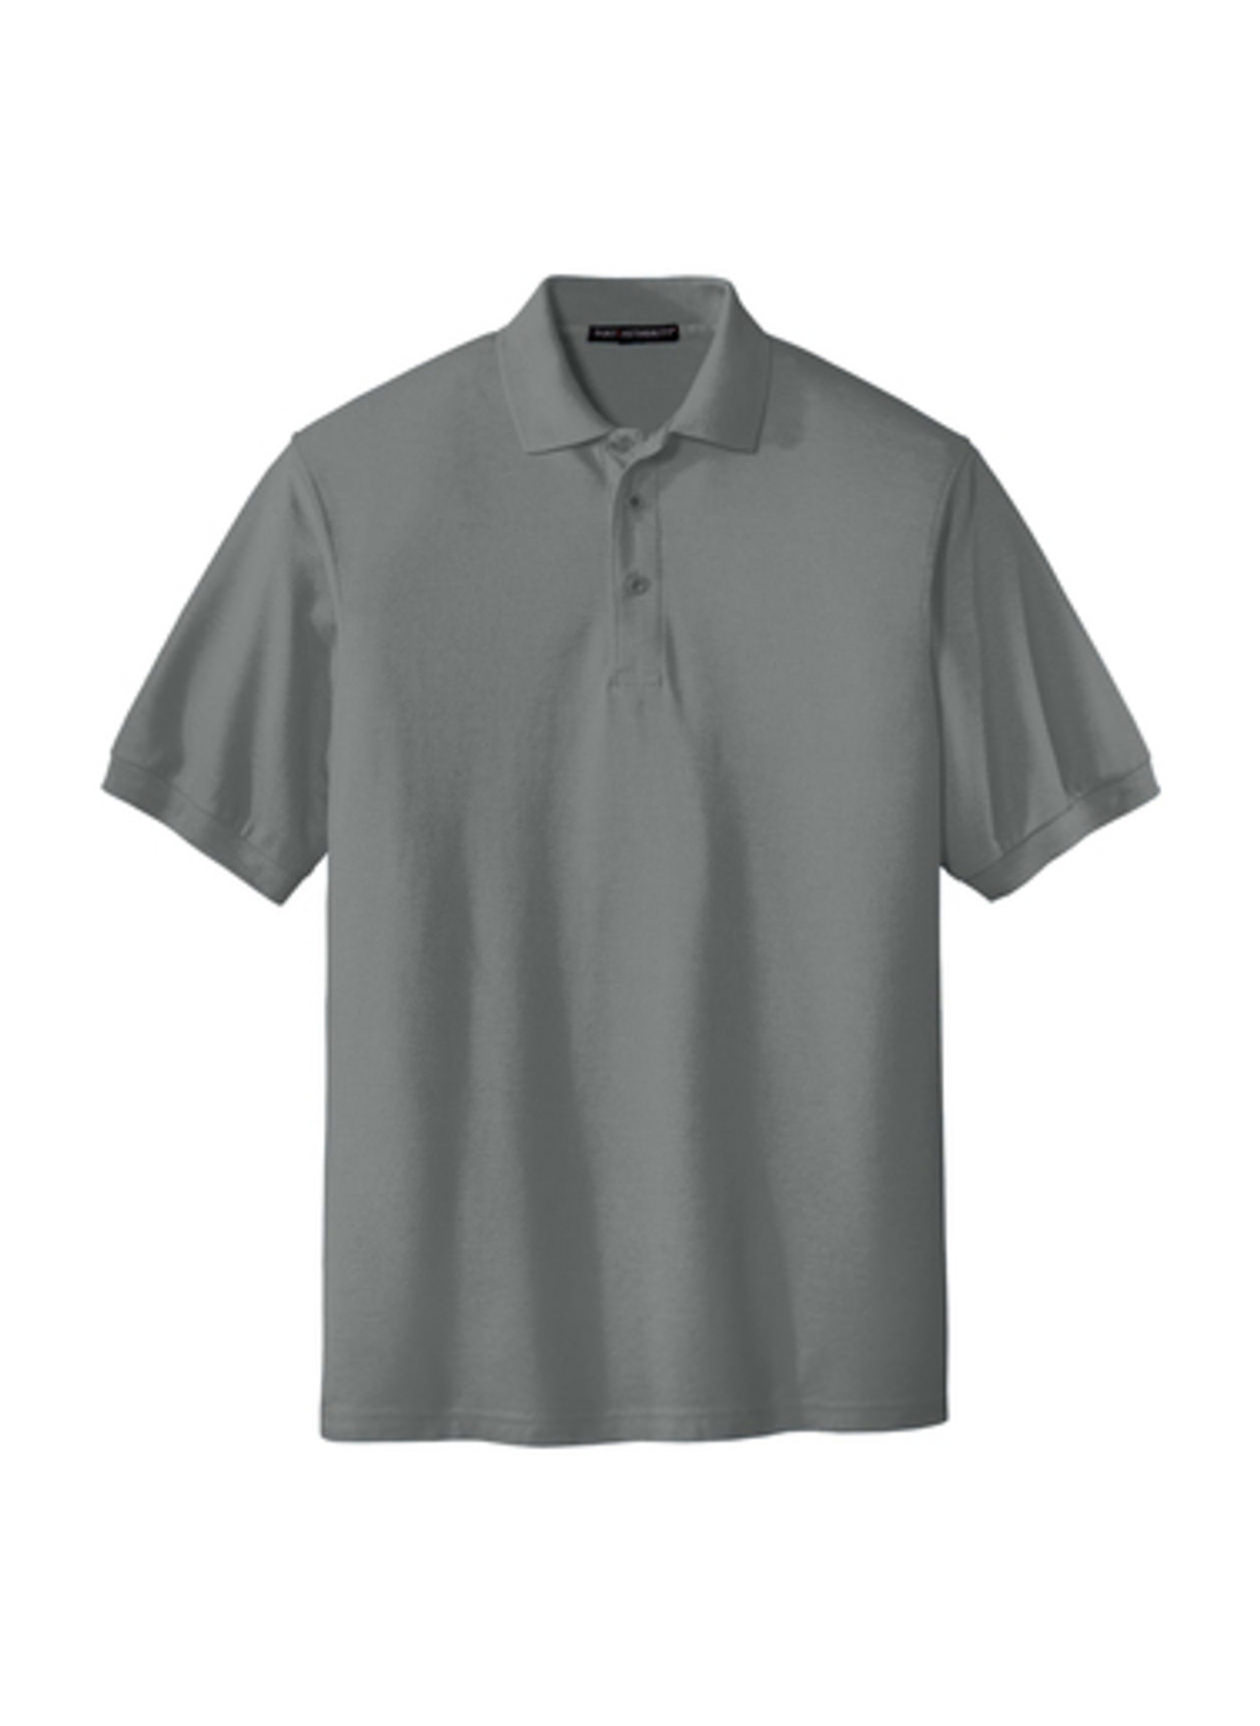 Port Authority Men's Cool Grey Silk Touch Polo